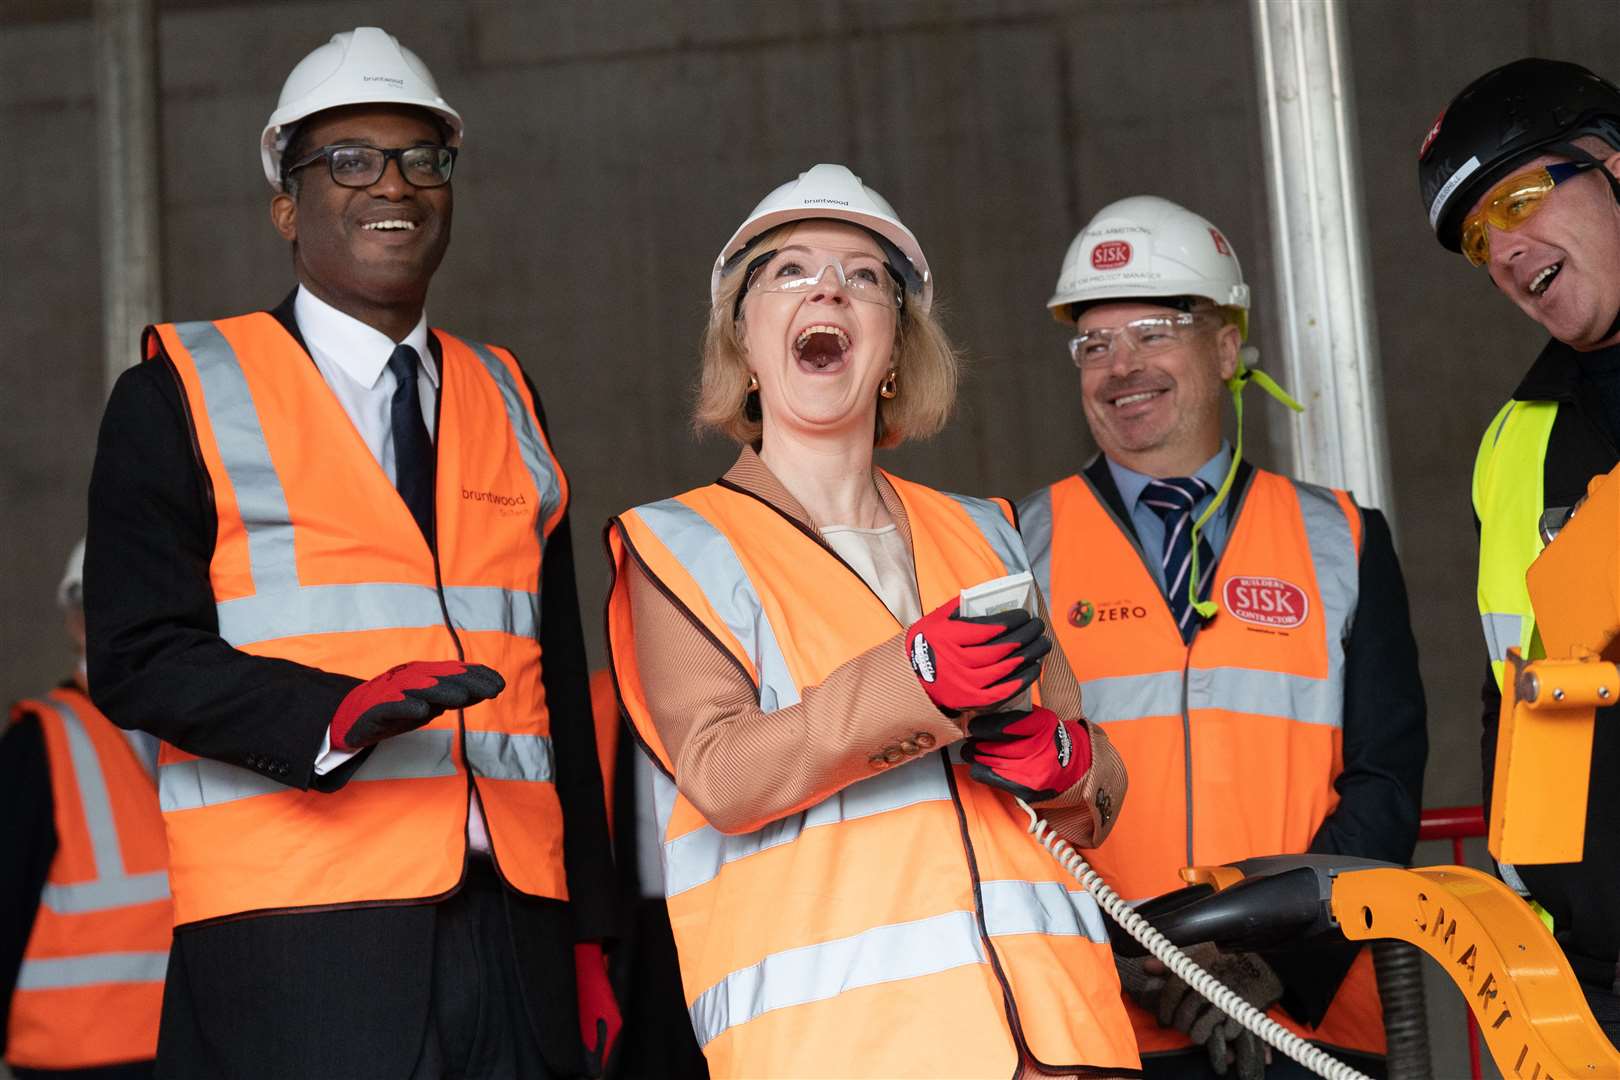 Prime minister Liz Truss and chancellor Kwasi Kwarteng during a visit to a construction site in Birmingham, on day three of the Conservative Party annual conference (Stefan Rousseau/PA)